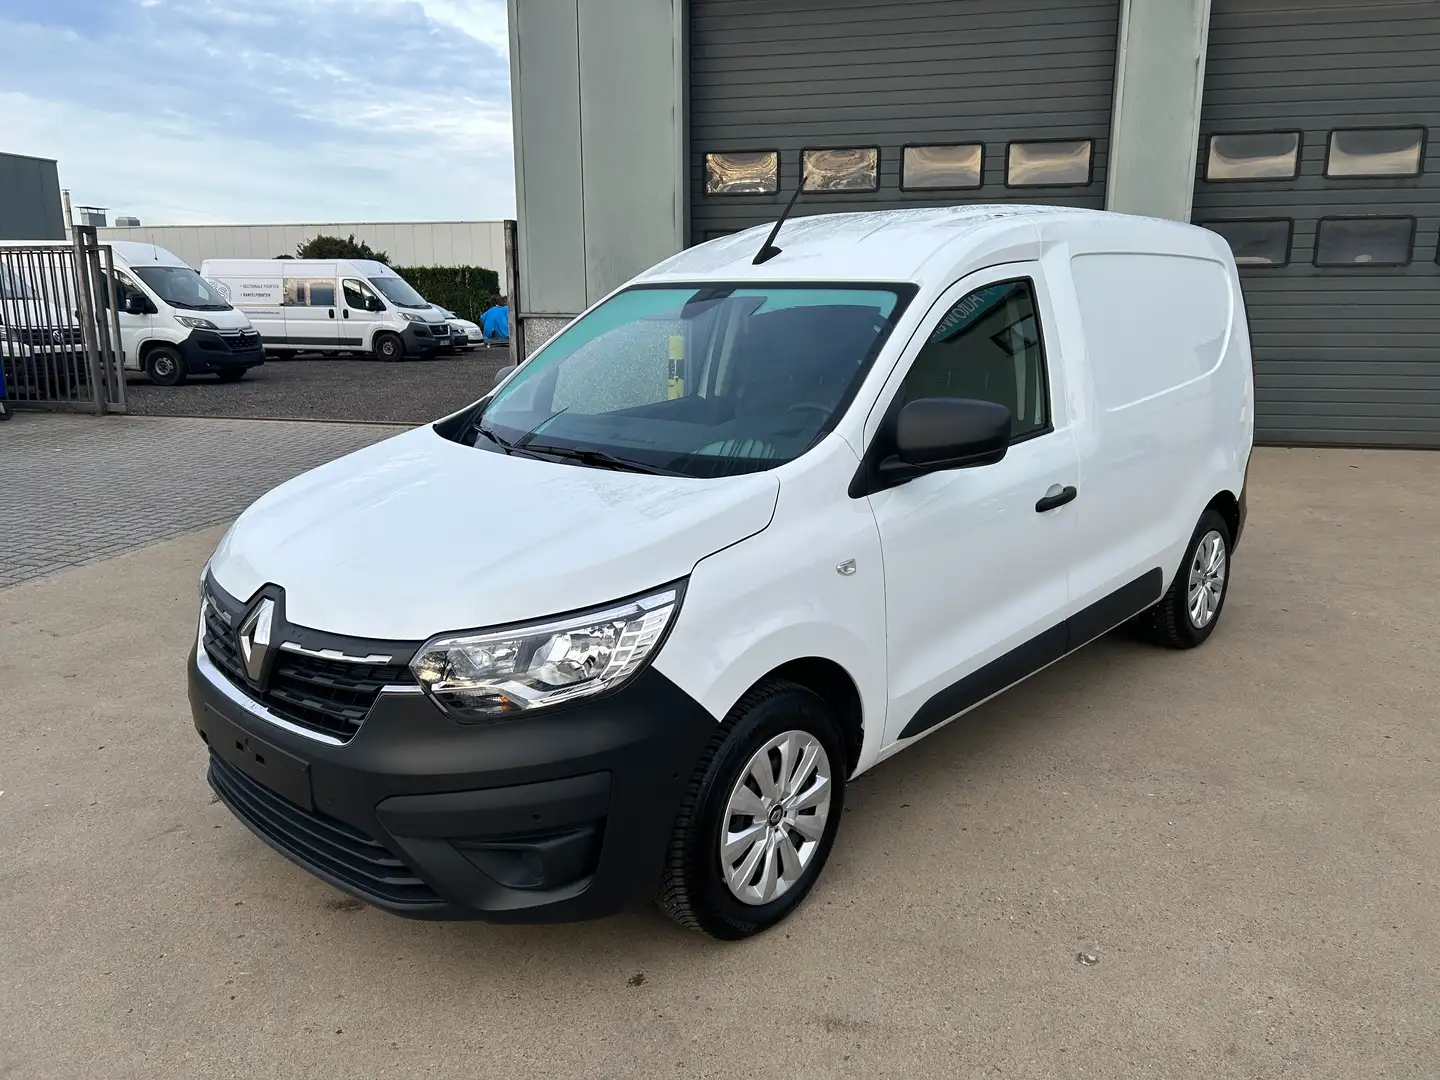 Renault Express 1.5dci airco navi camera cruise enzo confort uitv. Wit - 1